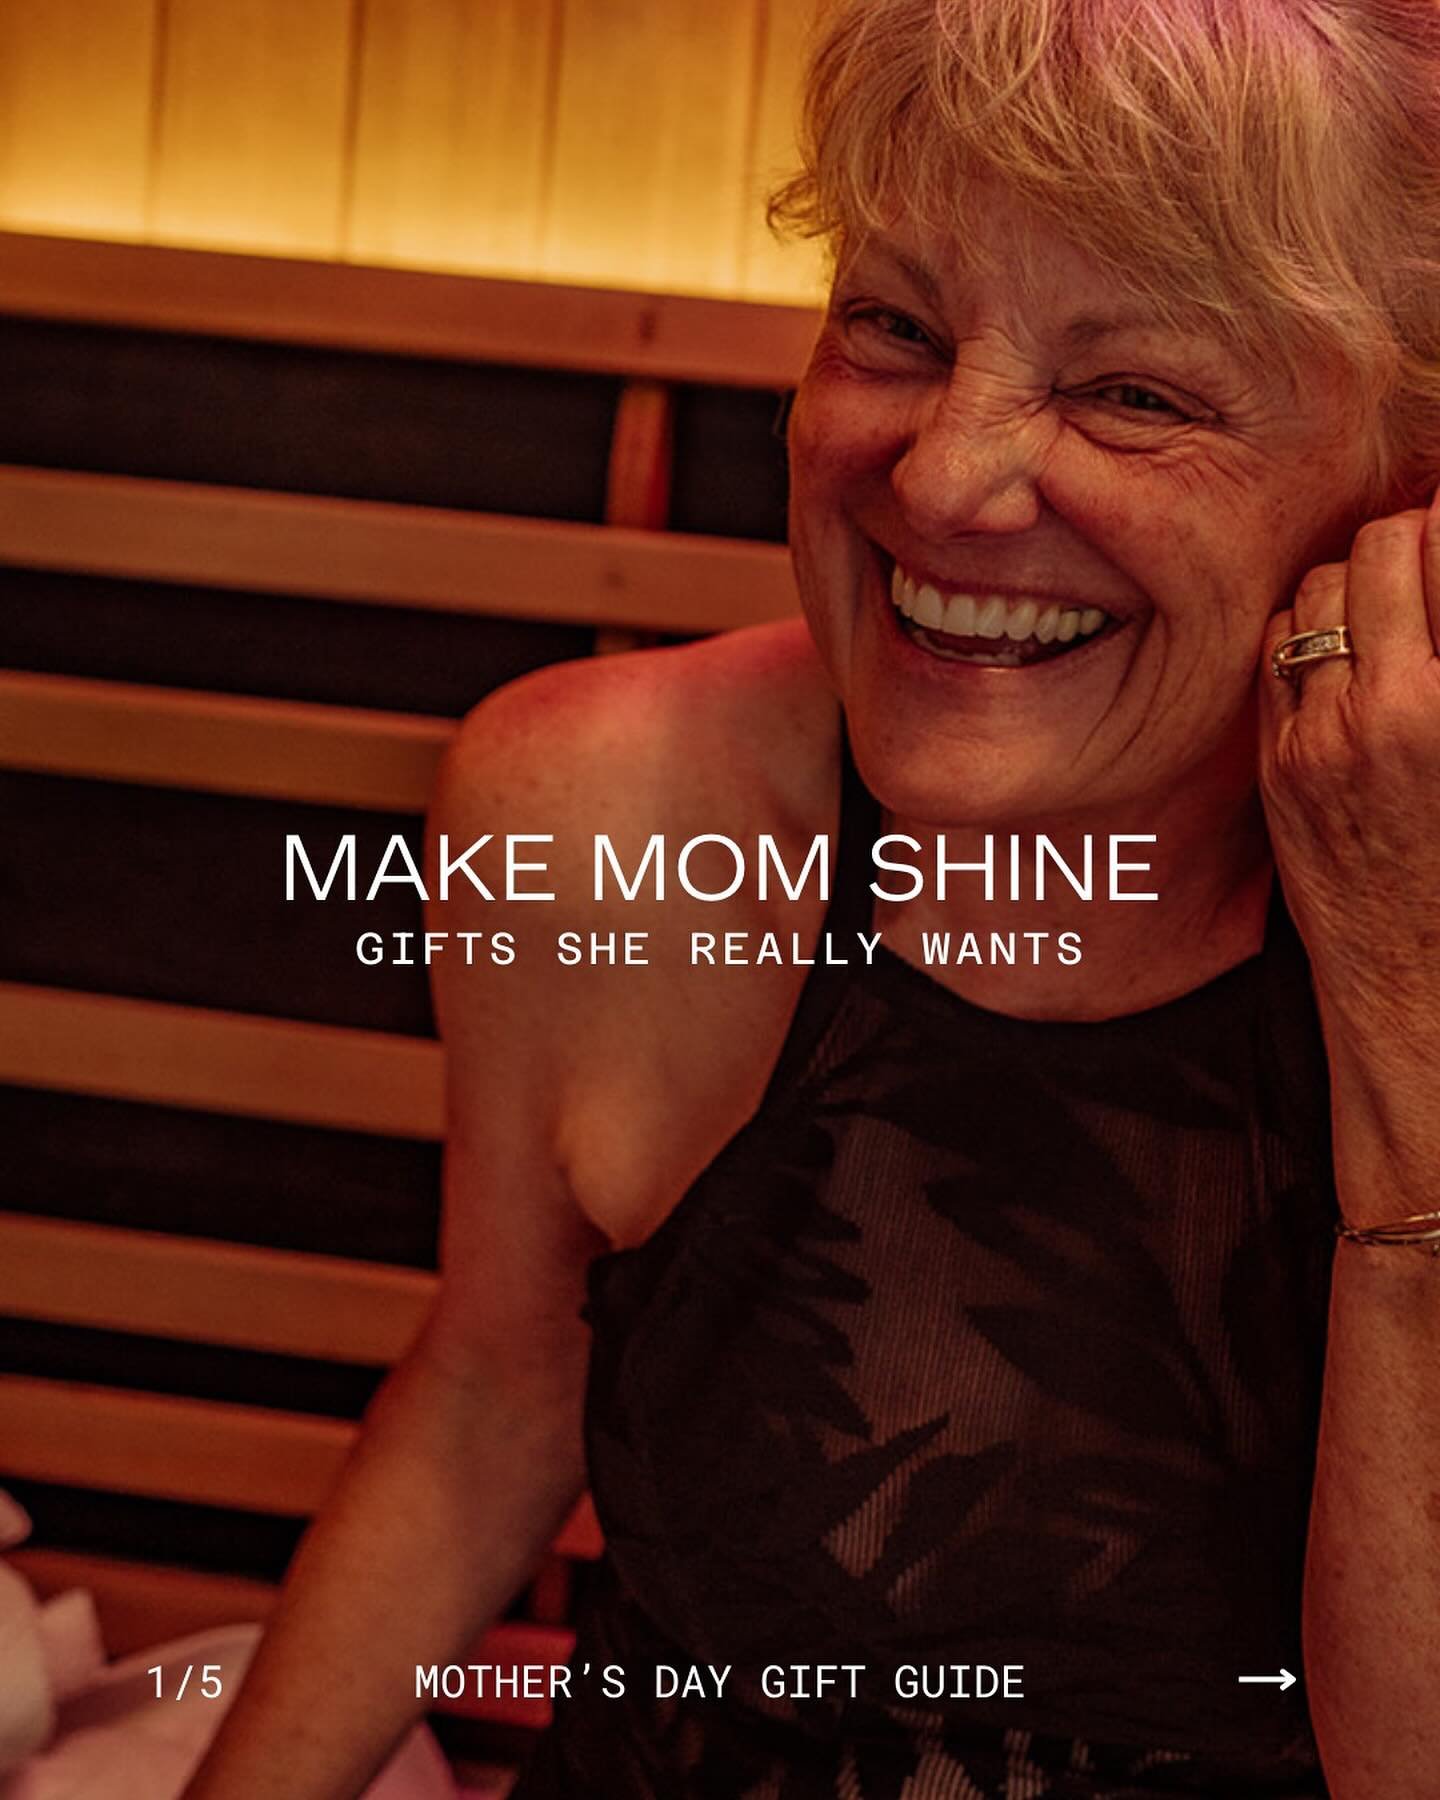 Make Mom SHINE 💖 this Mother&rsquo;s Day &mdash; get a FREE $25 bonus gift card with every $100 gift card purchase! Comment SHINE to get the code and shop our Mom-approved gift packages 🫶

What she really wants is&hellip;

✨ no to-do lists
✨ time t